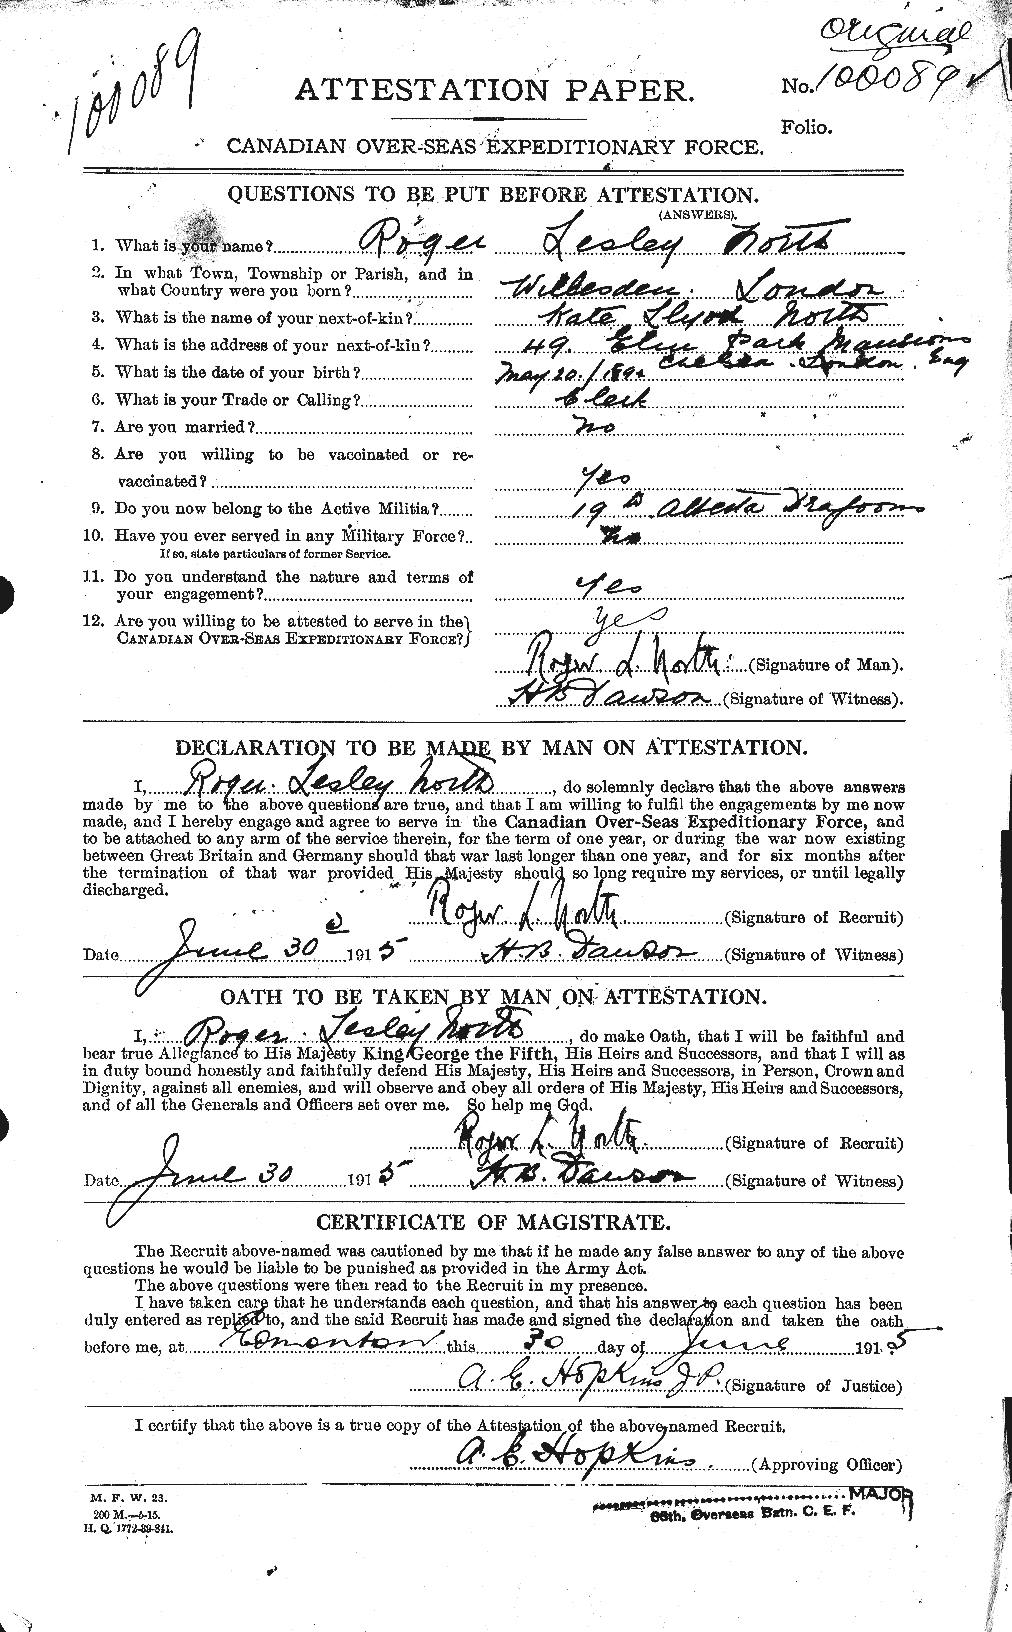 Personnel Records of the First World War - CEF 549928a